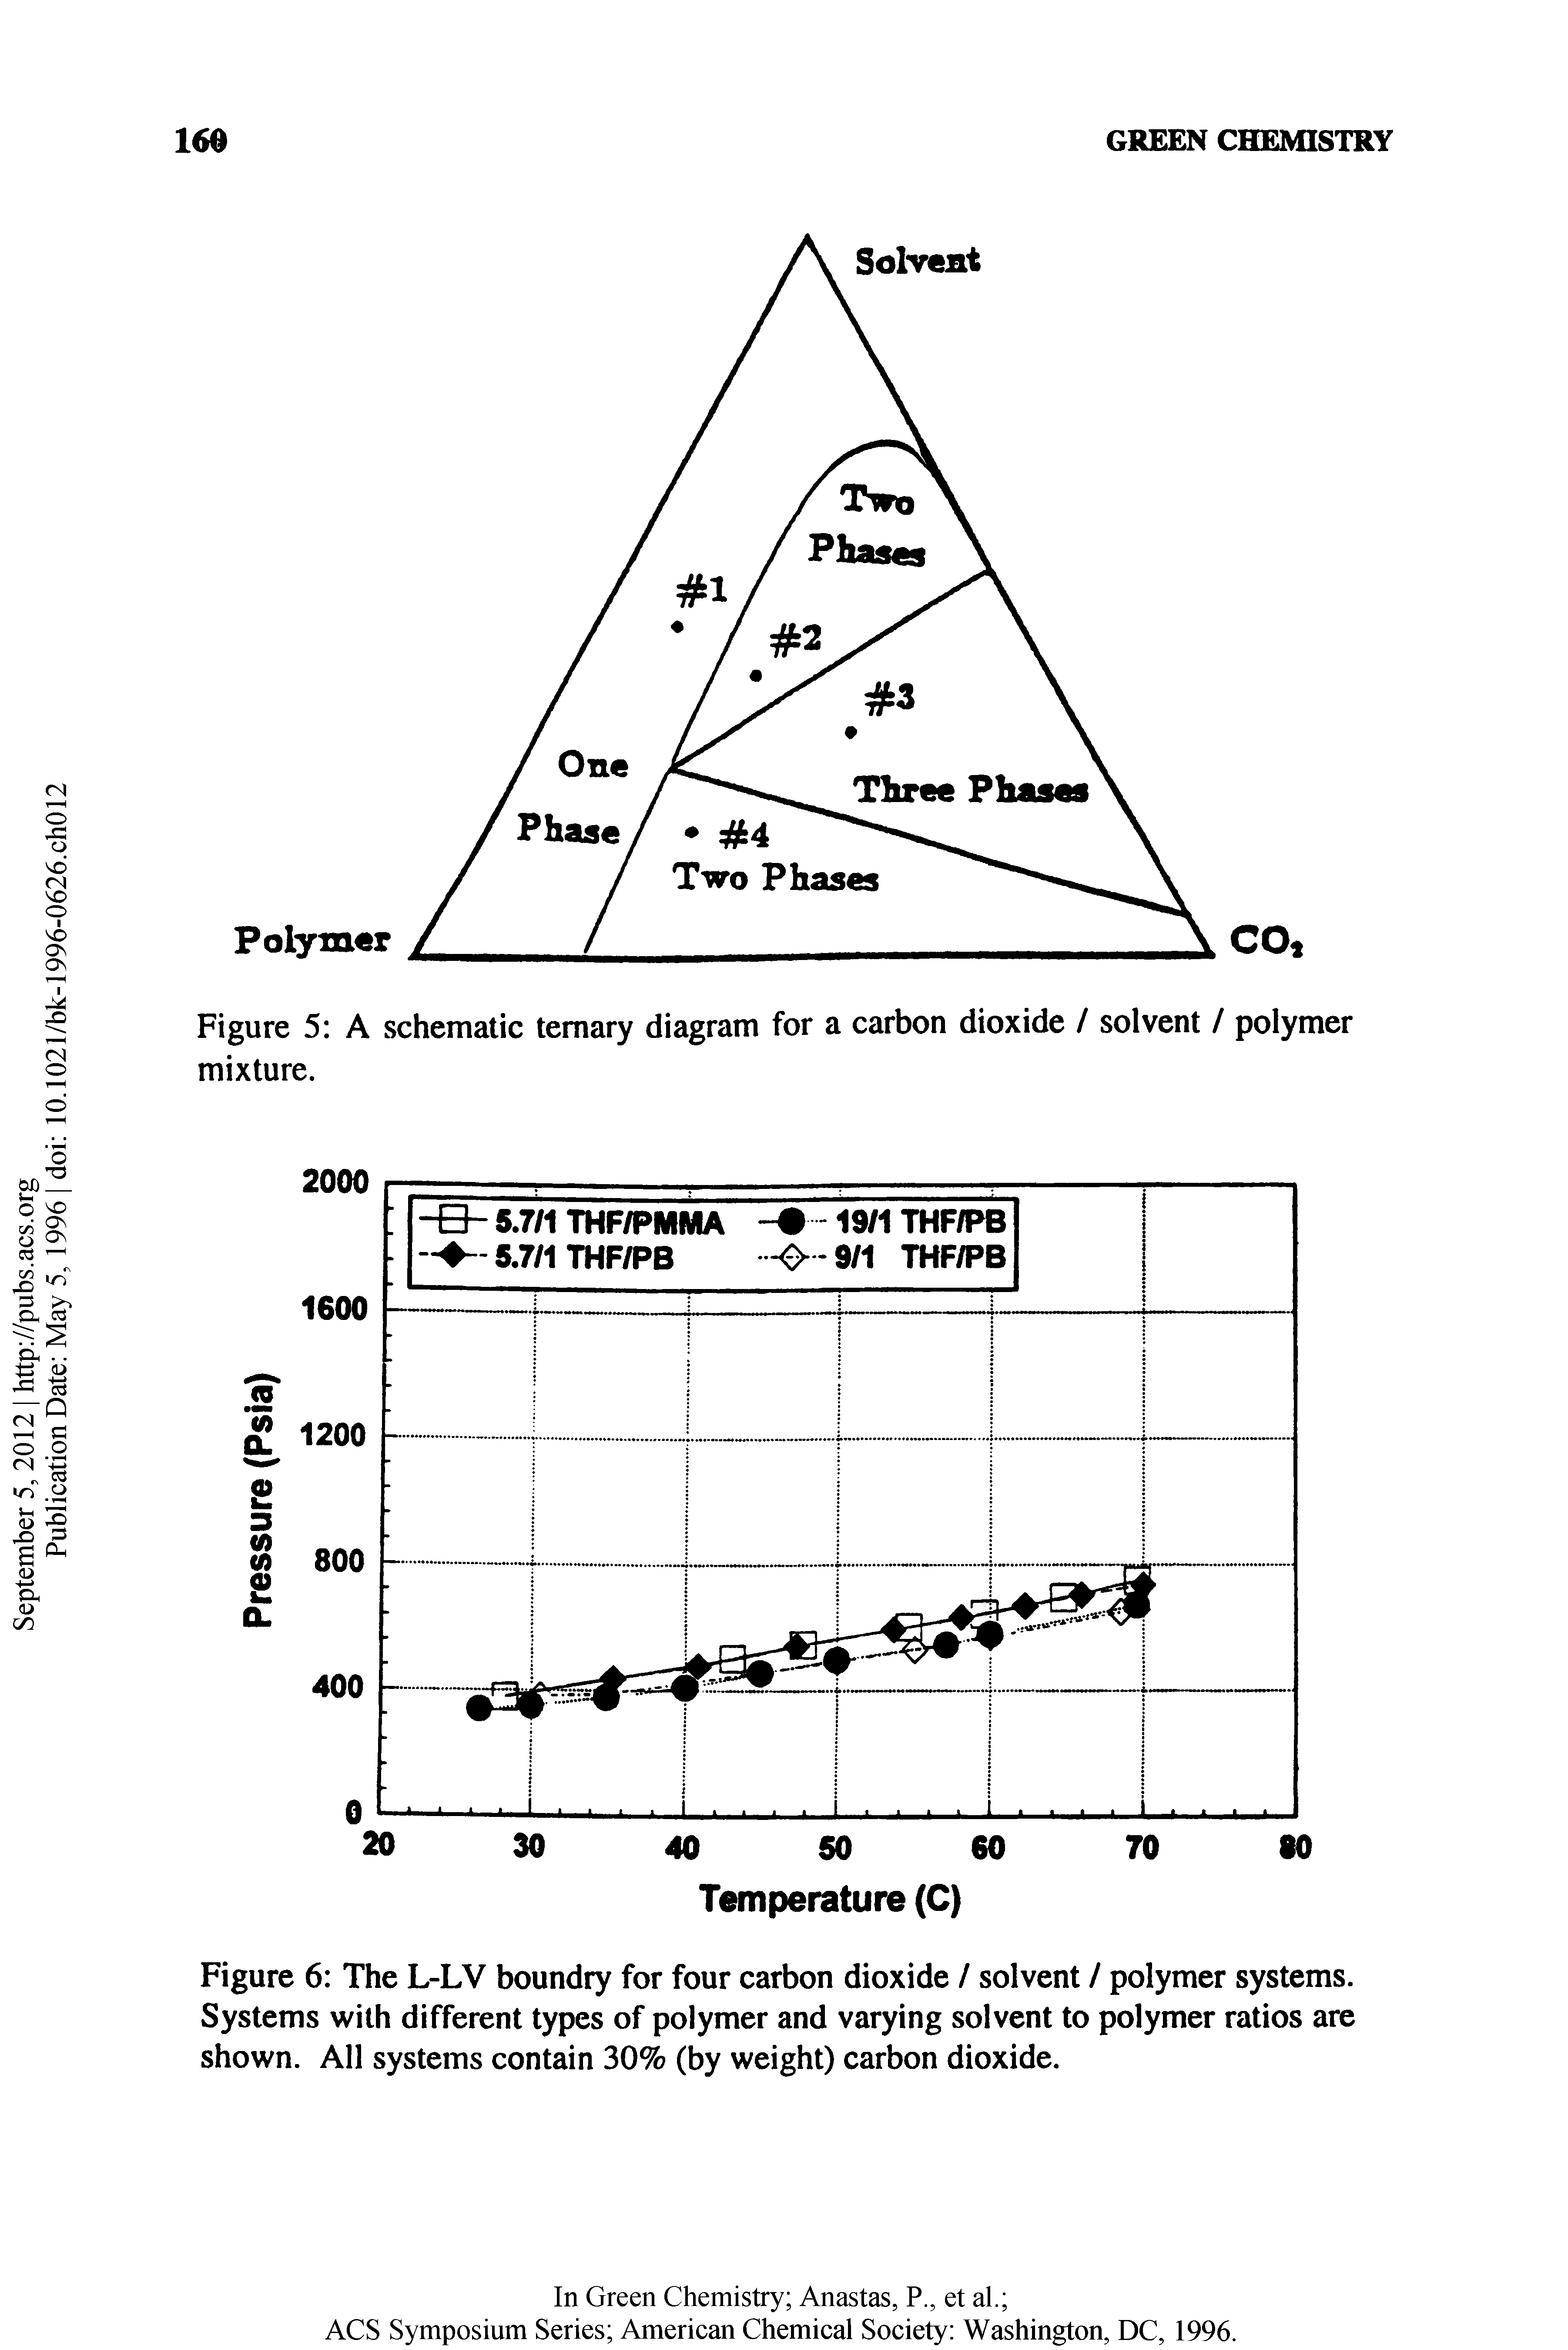 Figure 5 A schematic ternary diagram for a carbon dioxide / solvent / polymer mixture.